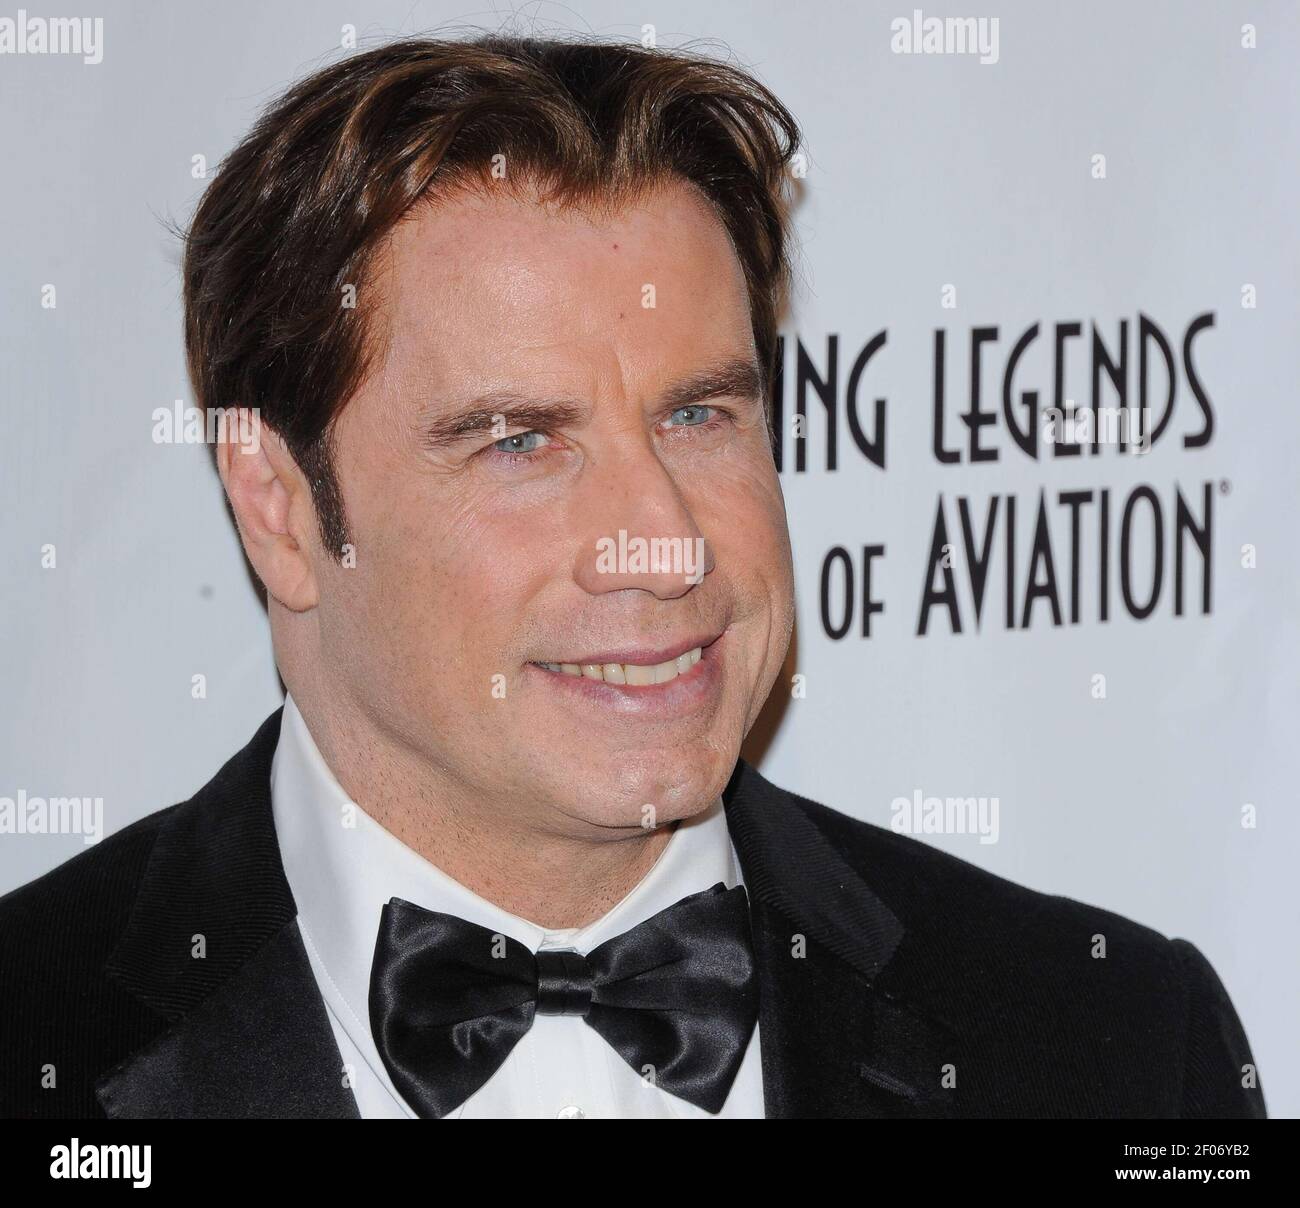 John Travolta. 8th Annual Living Legends of Aviation held at the Beverly Hilton Hotel. 22 January 2011, Beverly Hills, CA. Photo Credit: Giulio Marcocchi/Sipa Press./Aviation_gm.035/1101221023 Stock Photo